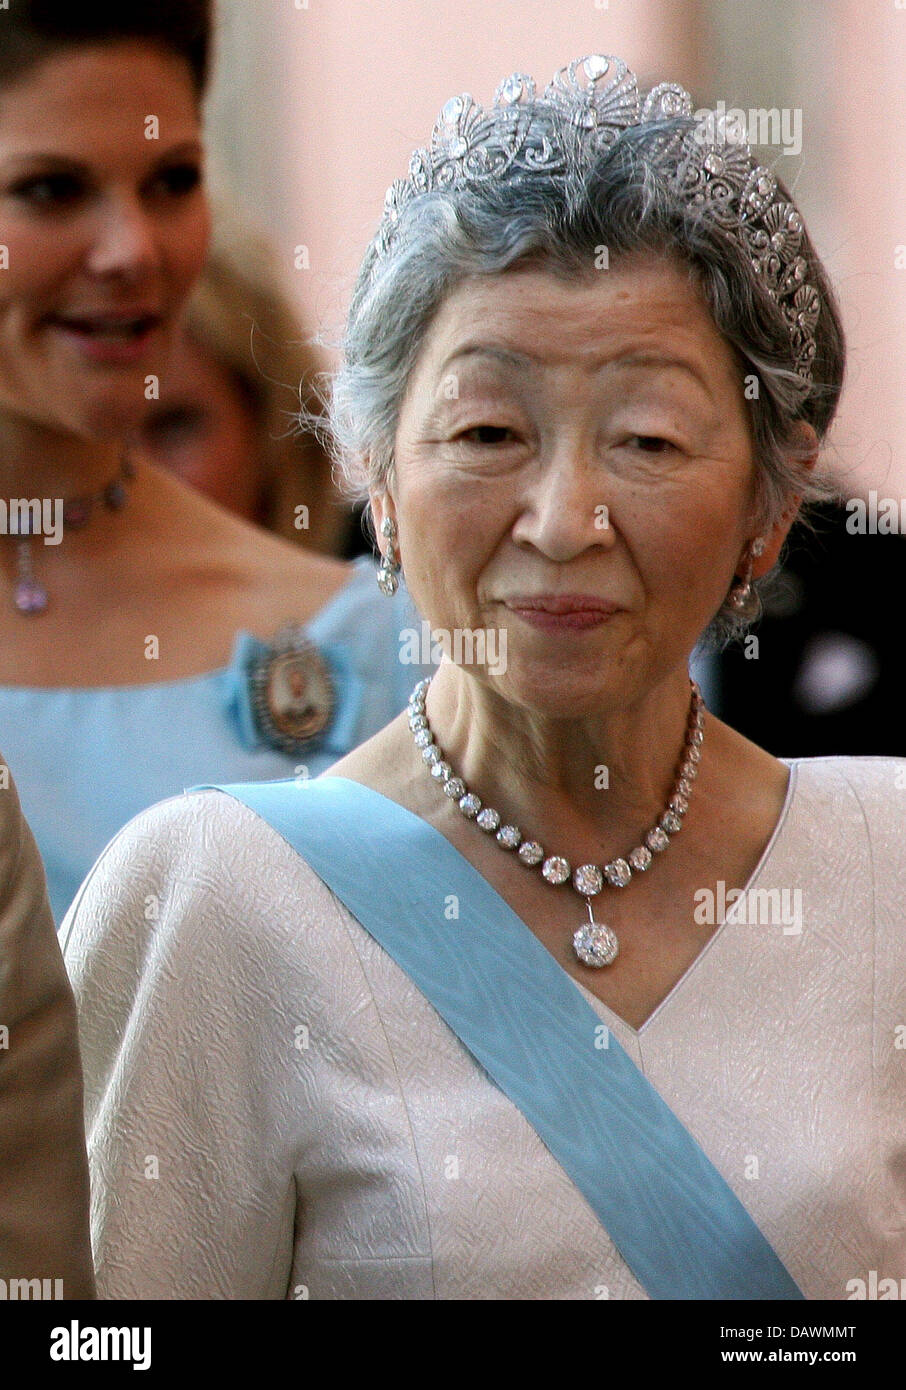 Japanese Empress Michiko arrives for a banquet at Uppsala Castle, Sweden, 23 May 2007. The Japanese Royal couple were the guests of honour at the festivities in Uppsala, as Sweden marks the 300th anniversary of Swedish botanist Carolus Linnaeus. Photo: RoyalPress/Nieboer (NETHERLANDS OUT) Stock Photo